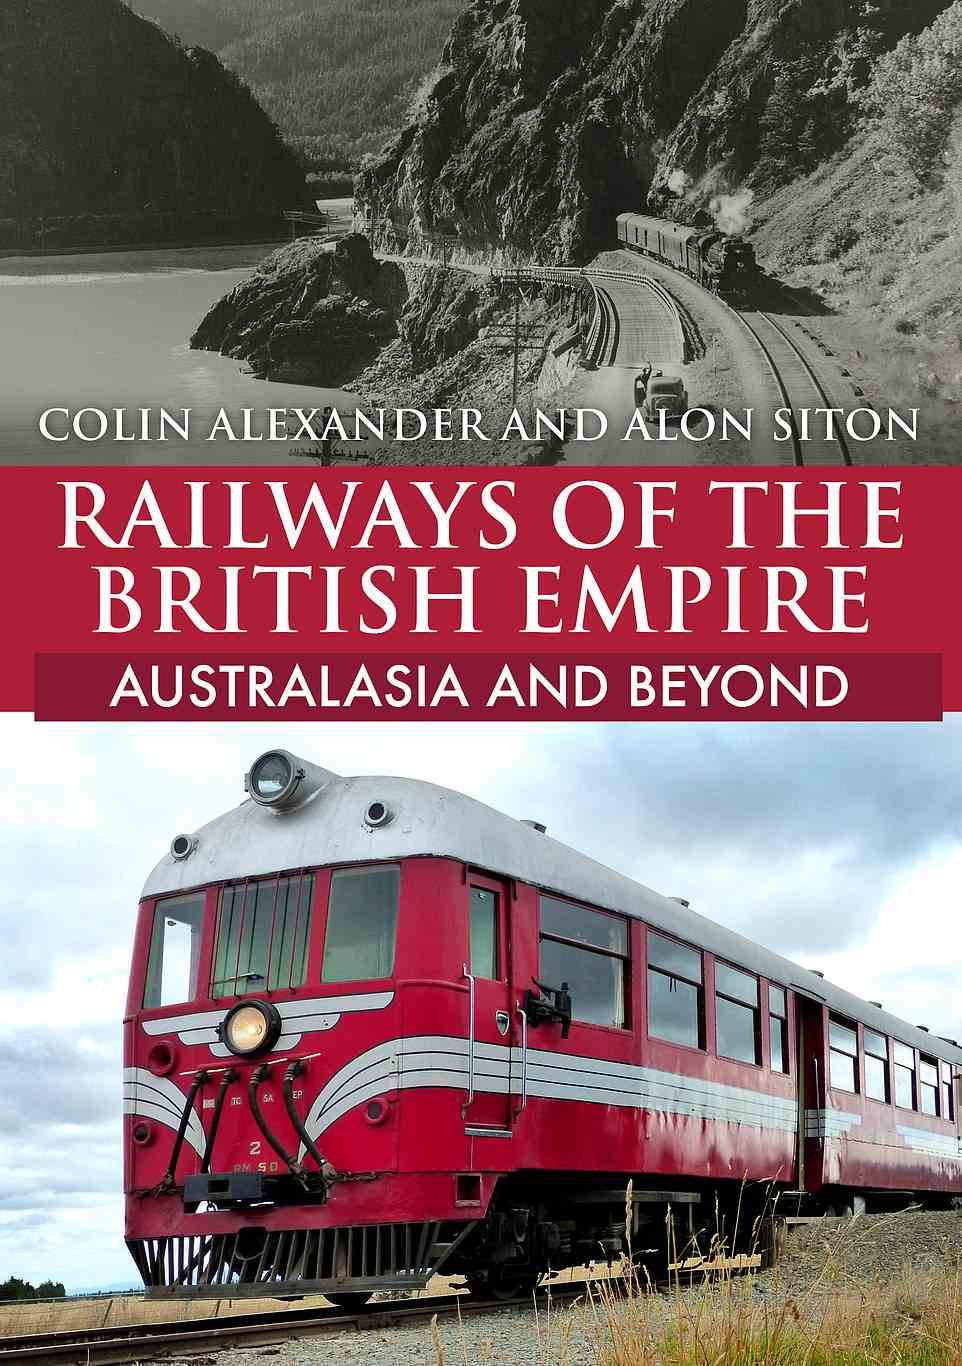 Railways of the British Empire - Australasia and Beyond, by Colin Alexander and Alon Siton (Amberley Publishing) is out now, priced £15.99